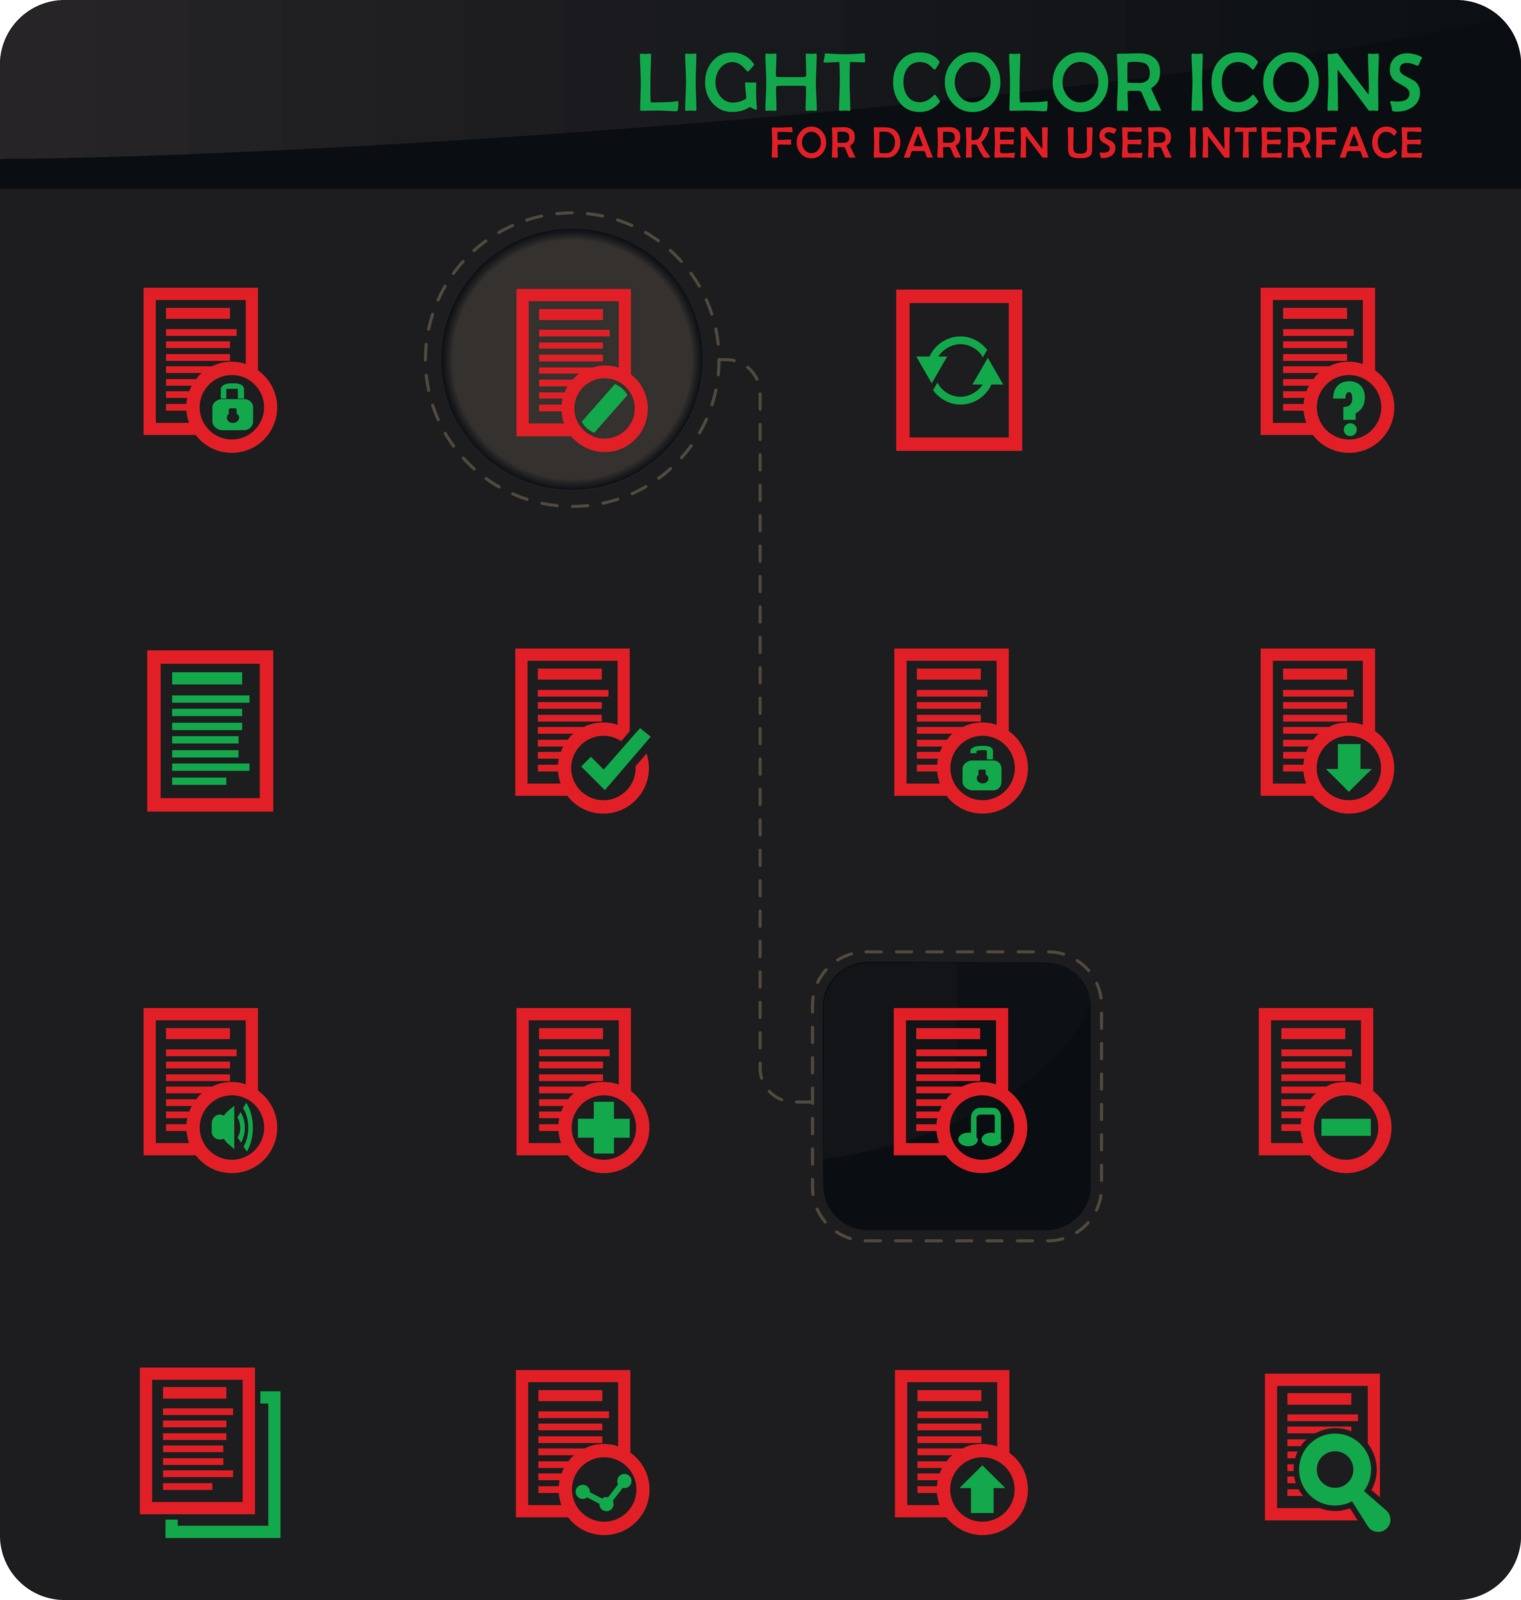 Documents easy color vector icons on darken background for user interface design